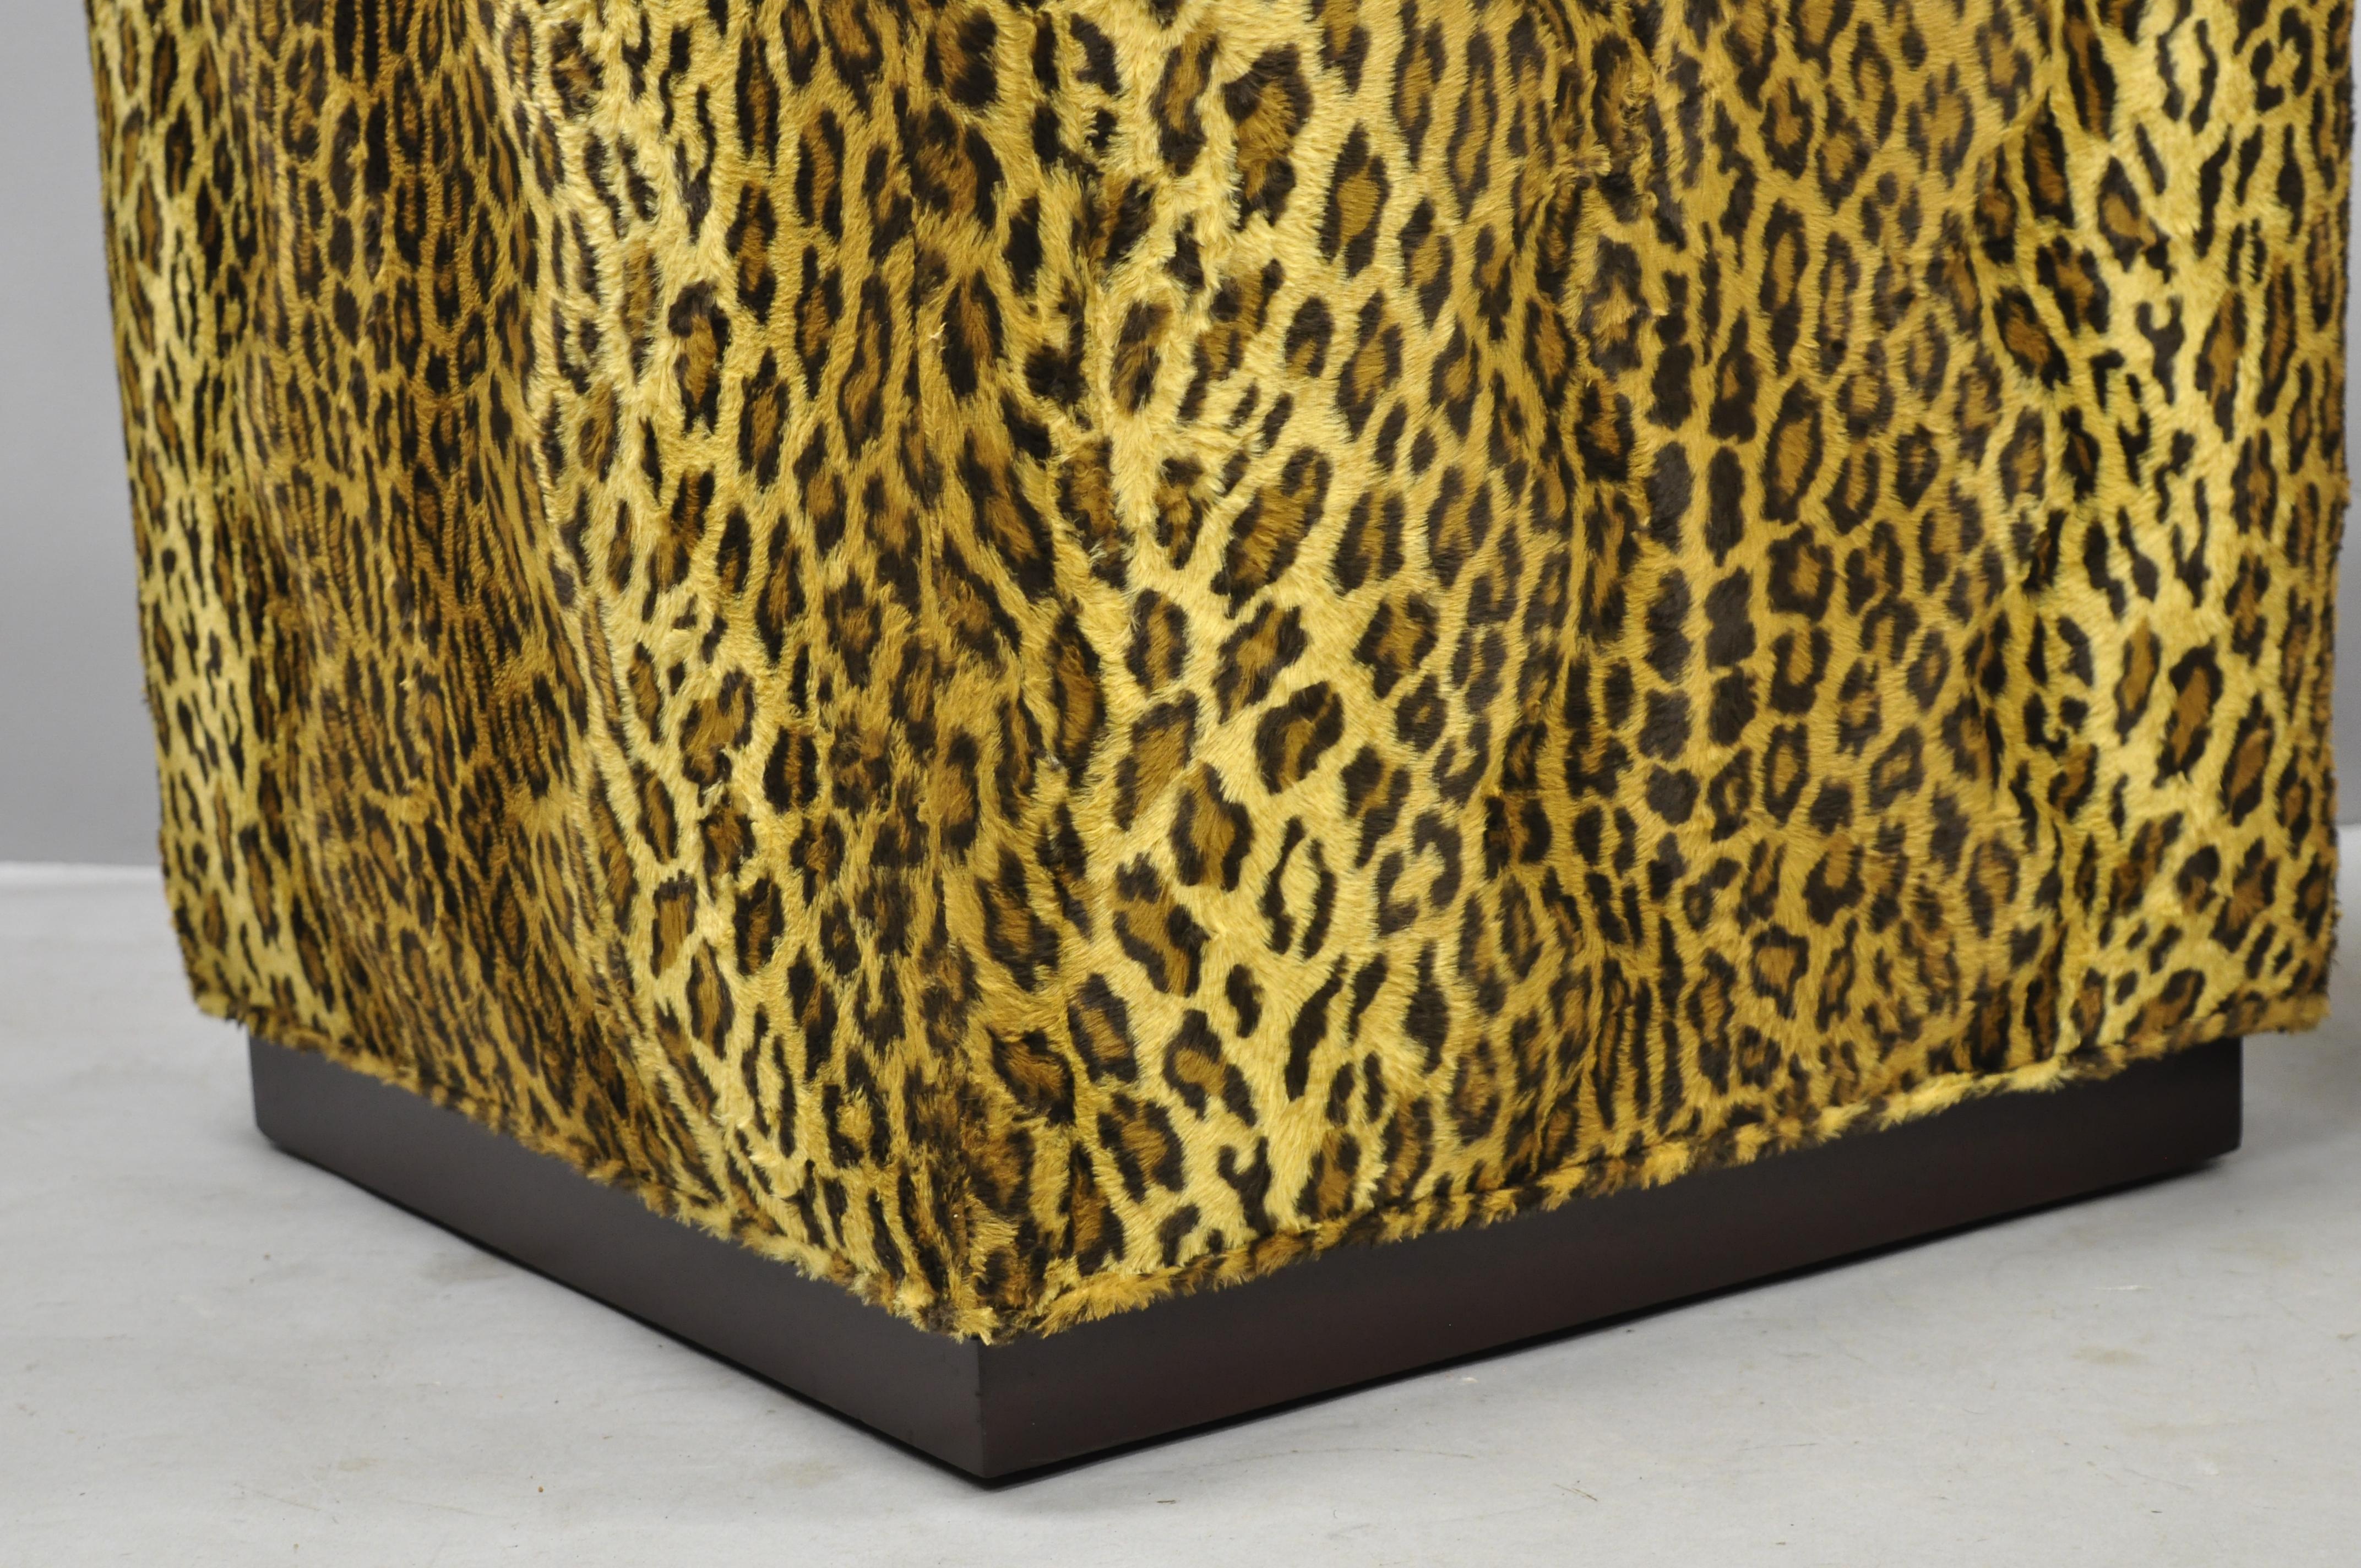 Pair of Colby Cube Ottoman Stools Leopard Cheetah Print Fabric by Barclay Butera 3